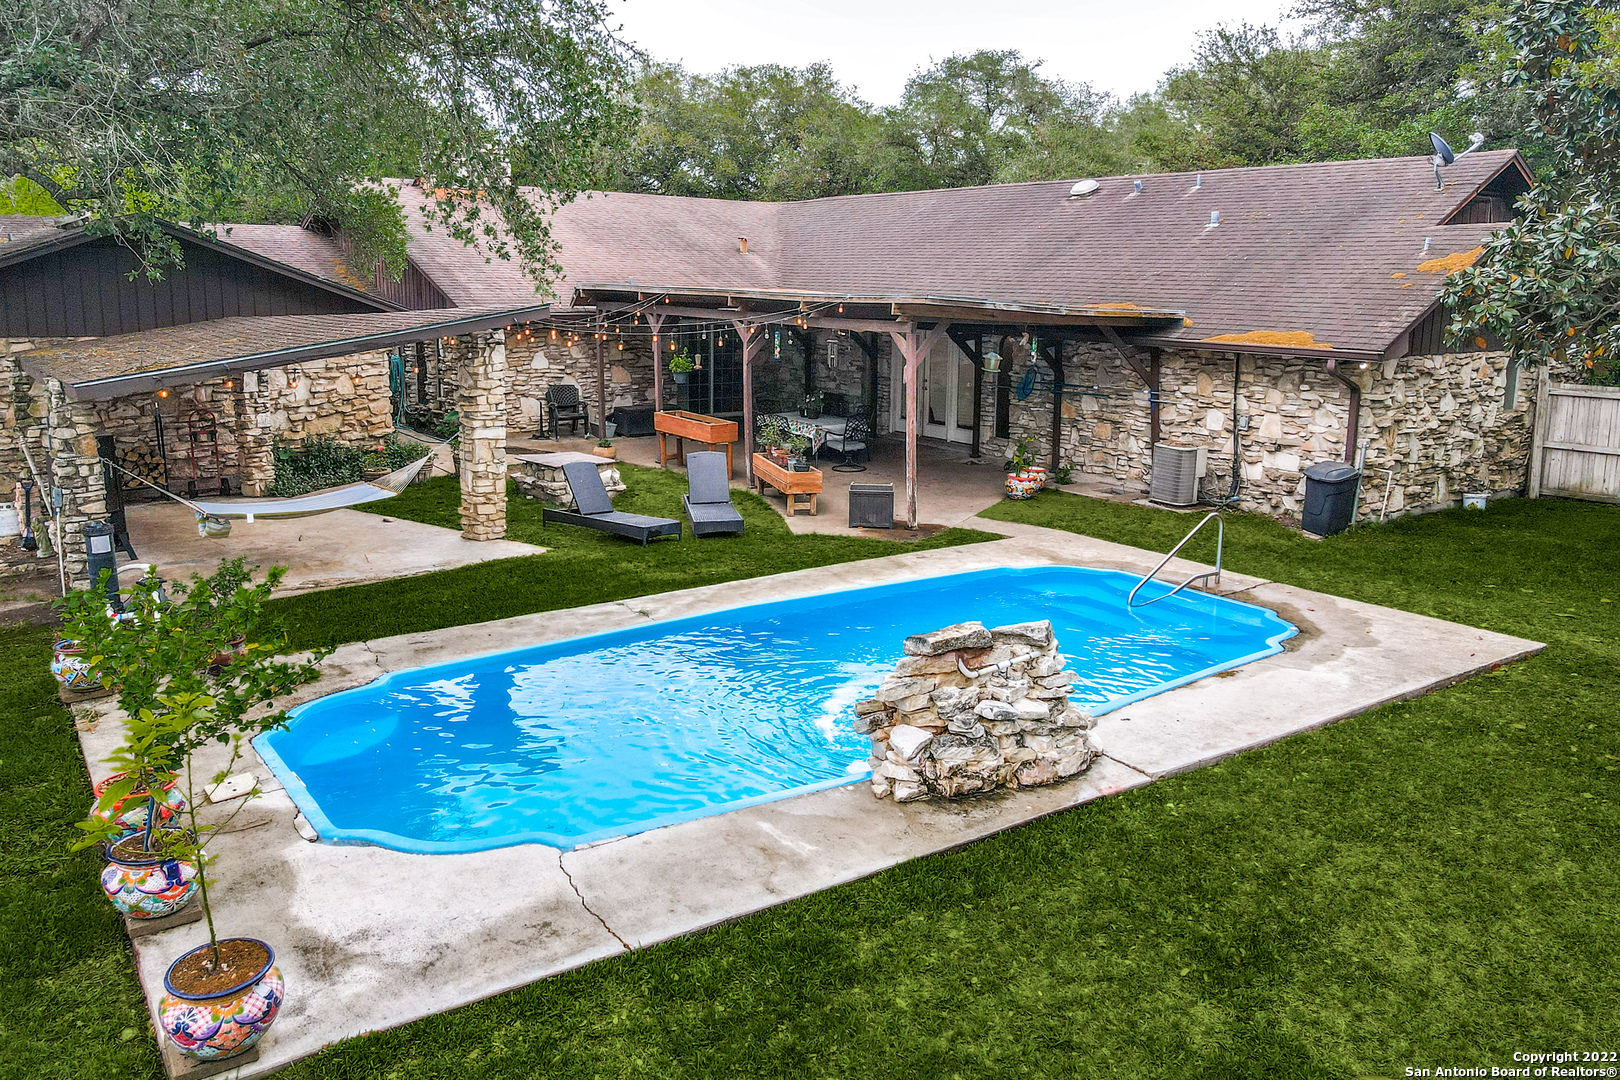 a view of a house with swimming pool yard and patio